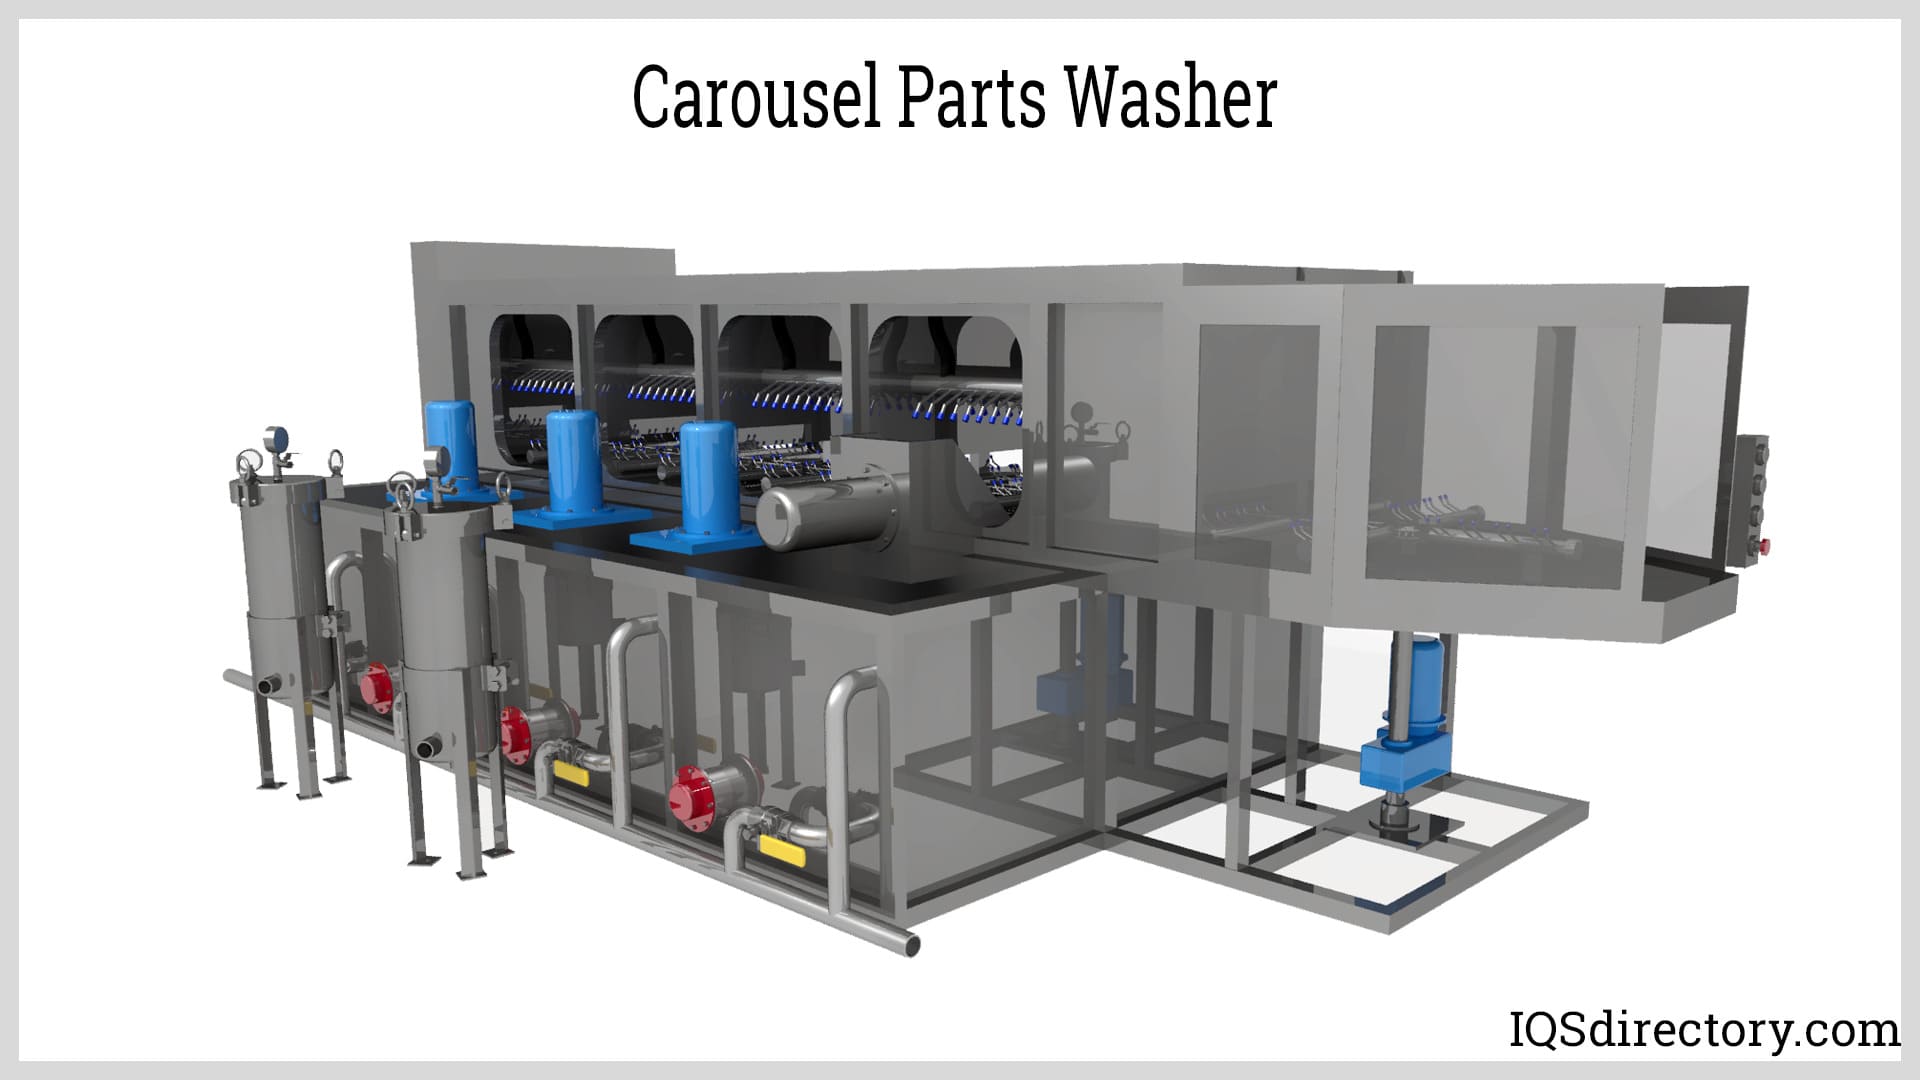 Carousel Parts Washer